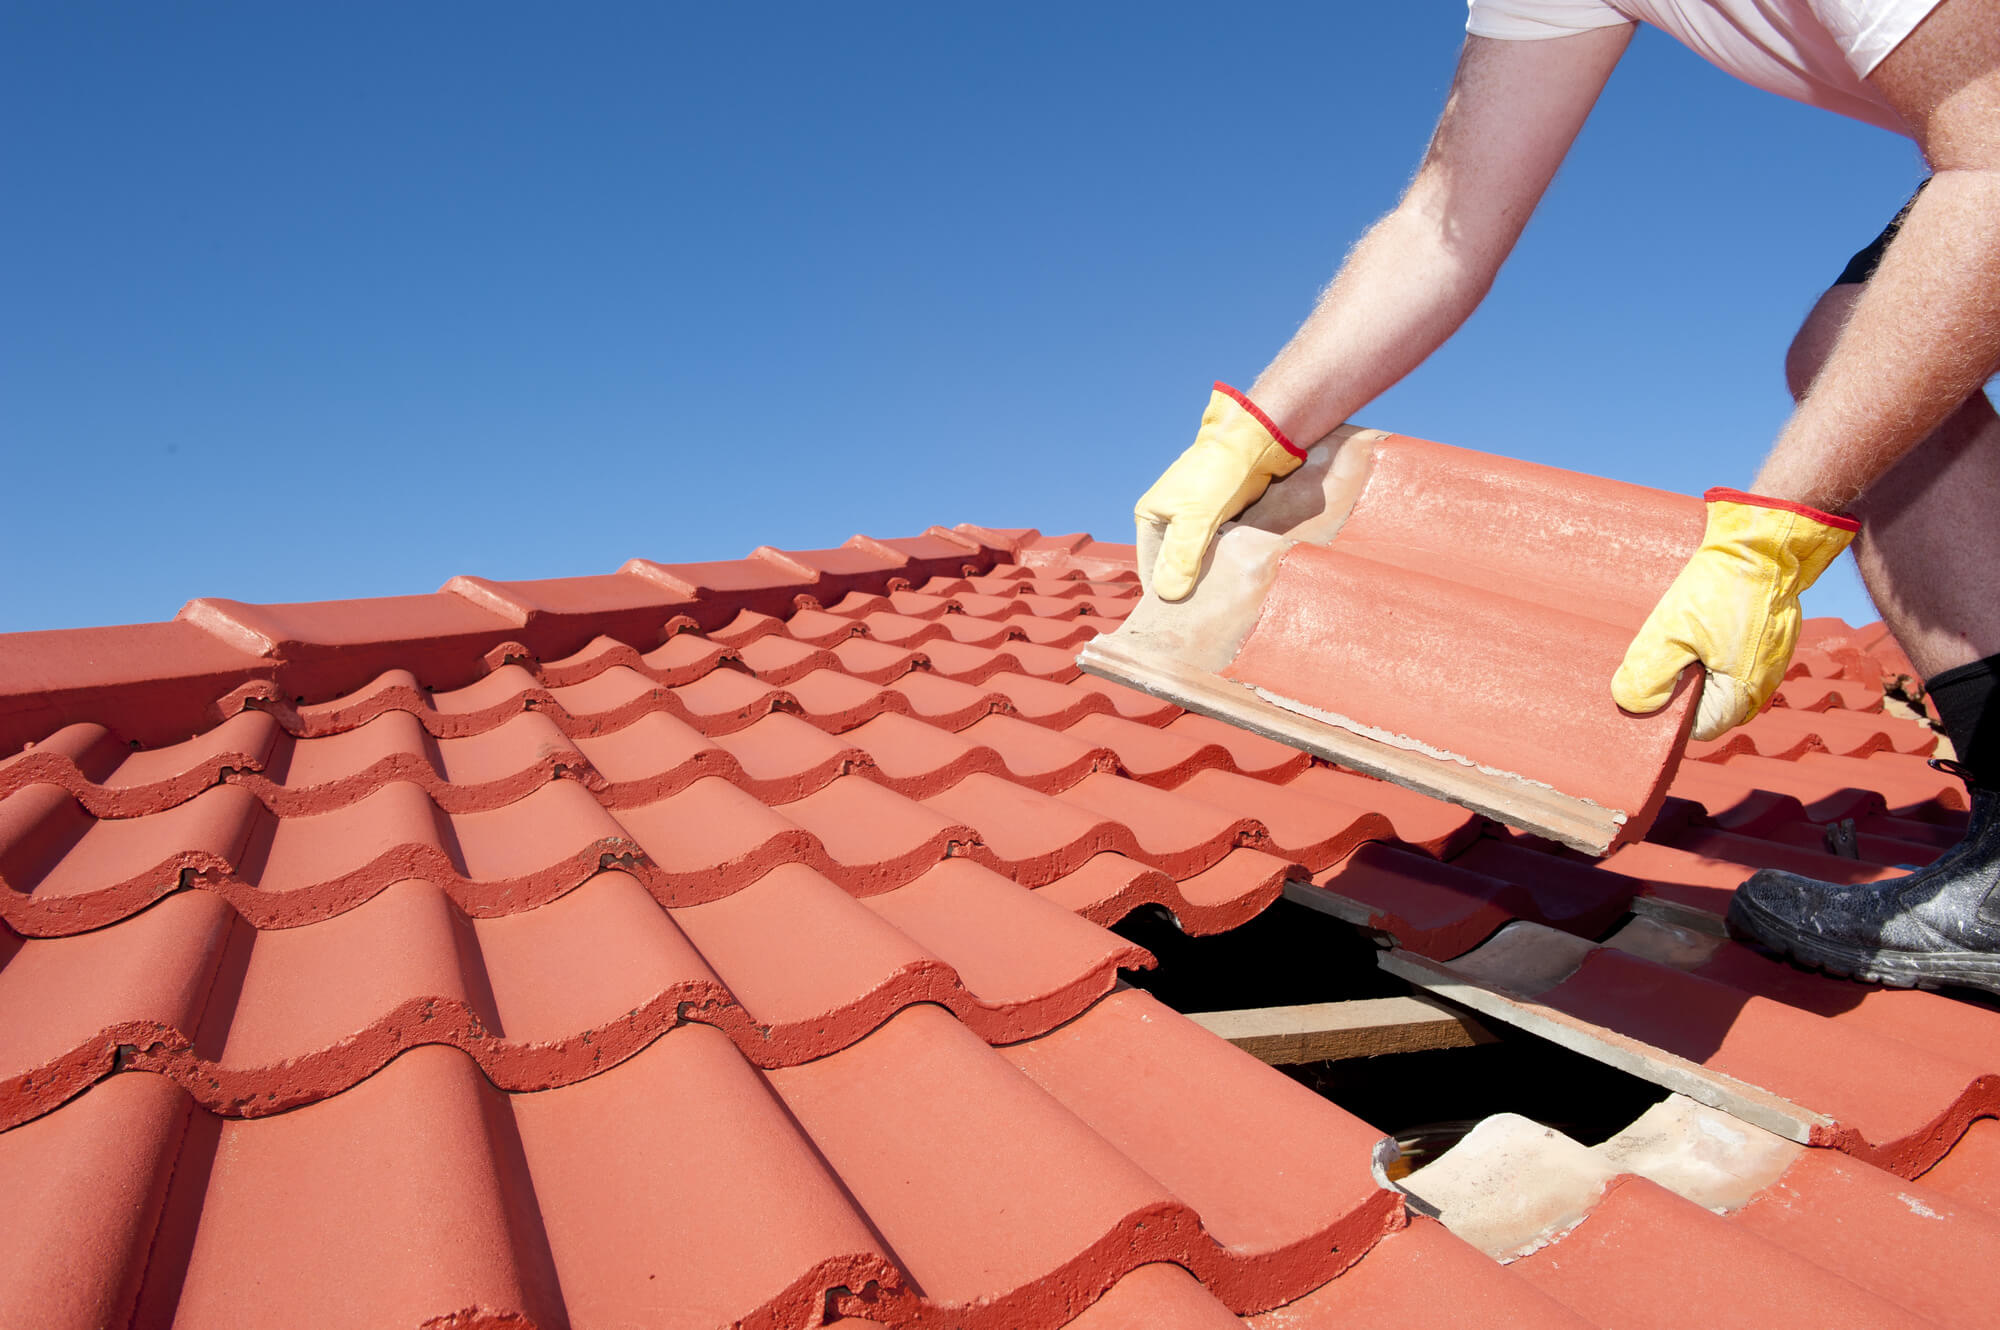 Common Questions About Residential Roofing - West Friendship Roofing